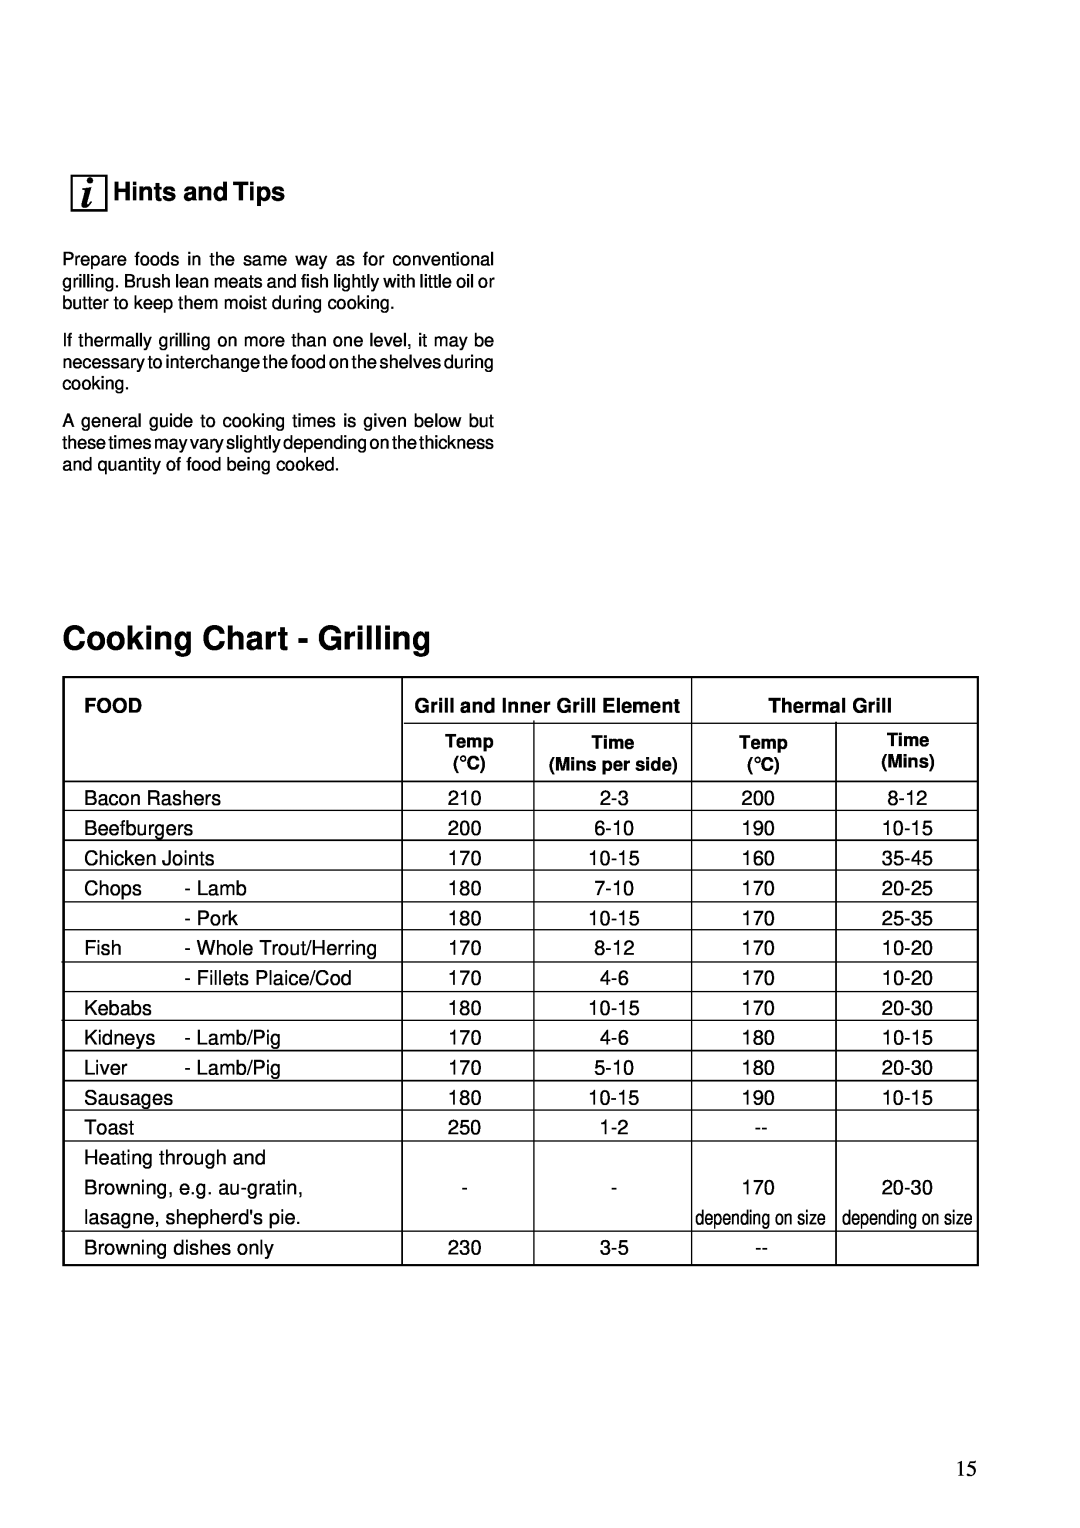 Zanussi 641, BST 6 manual Cooking Chart - Grilling, Hints and Tips, Food, Grill and Inner Grill Element, Thermal Grill 